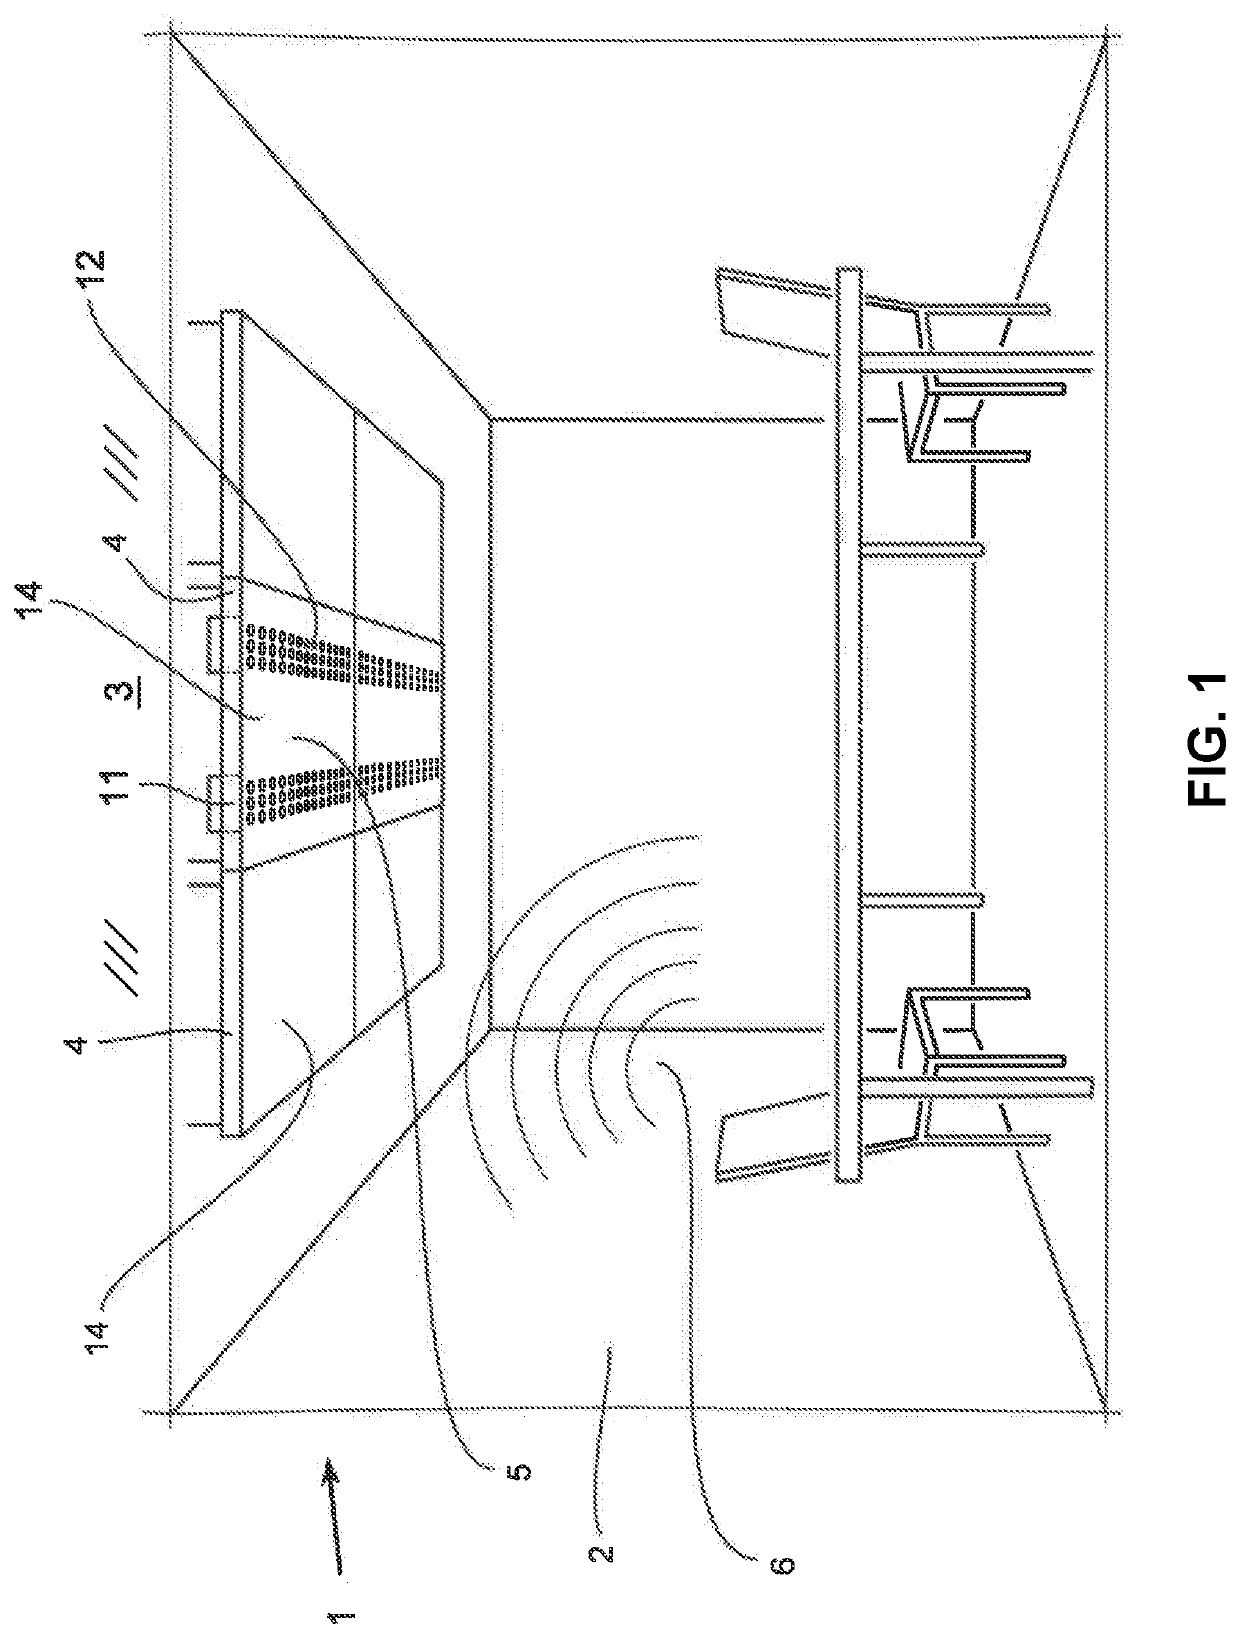 Sound-absorbing device